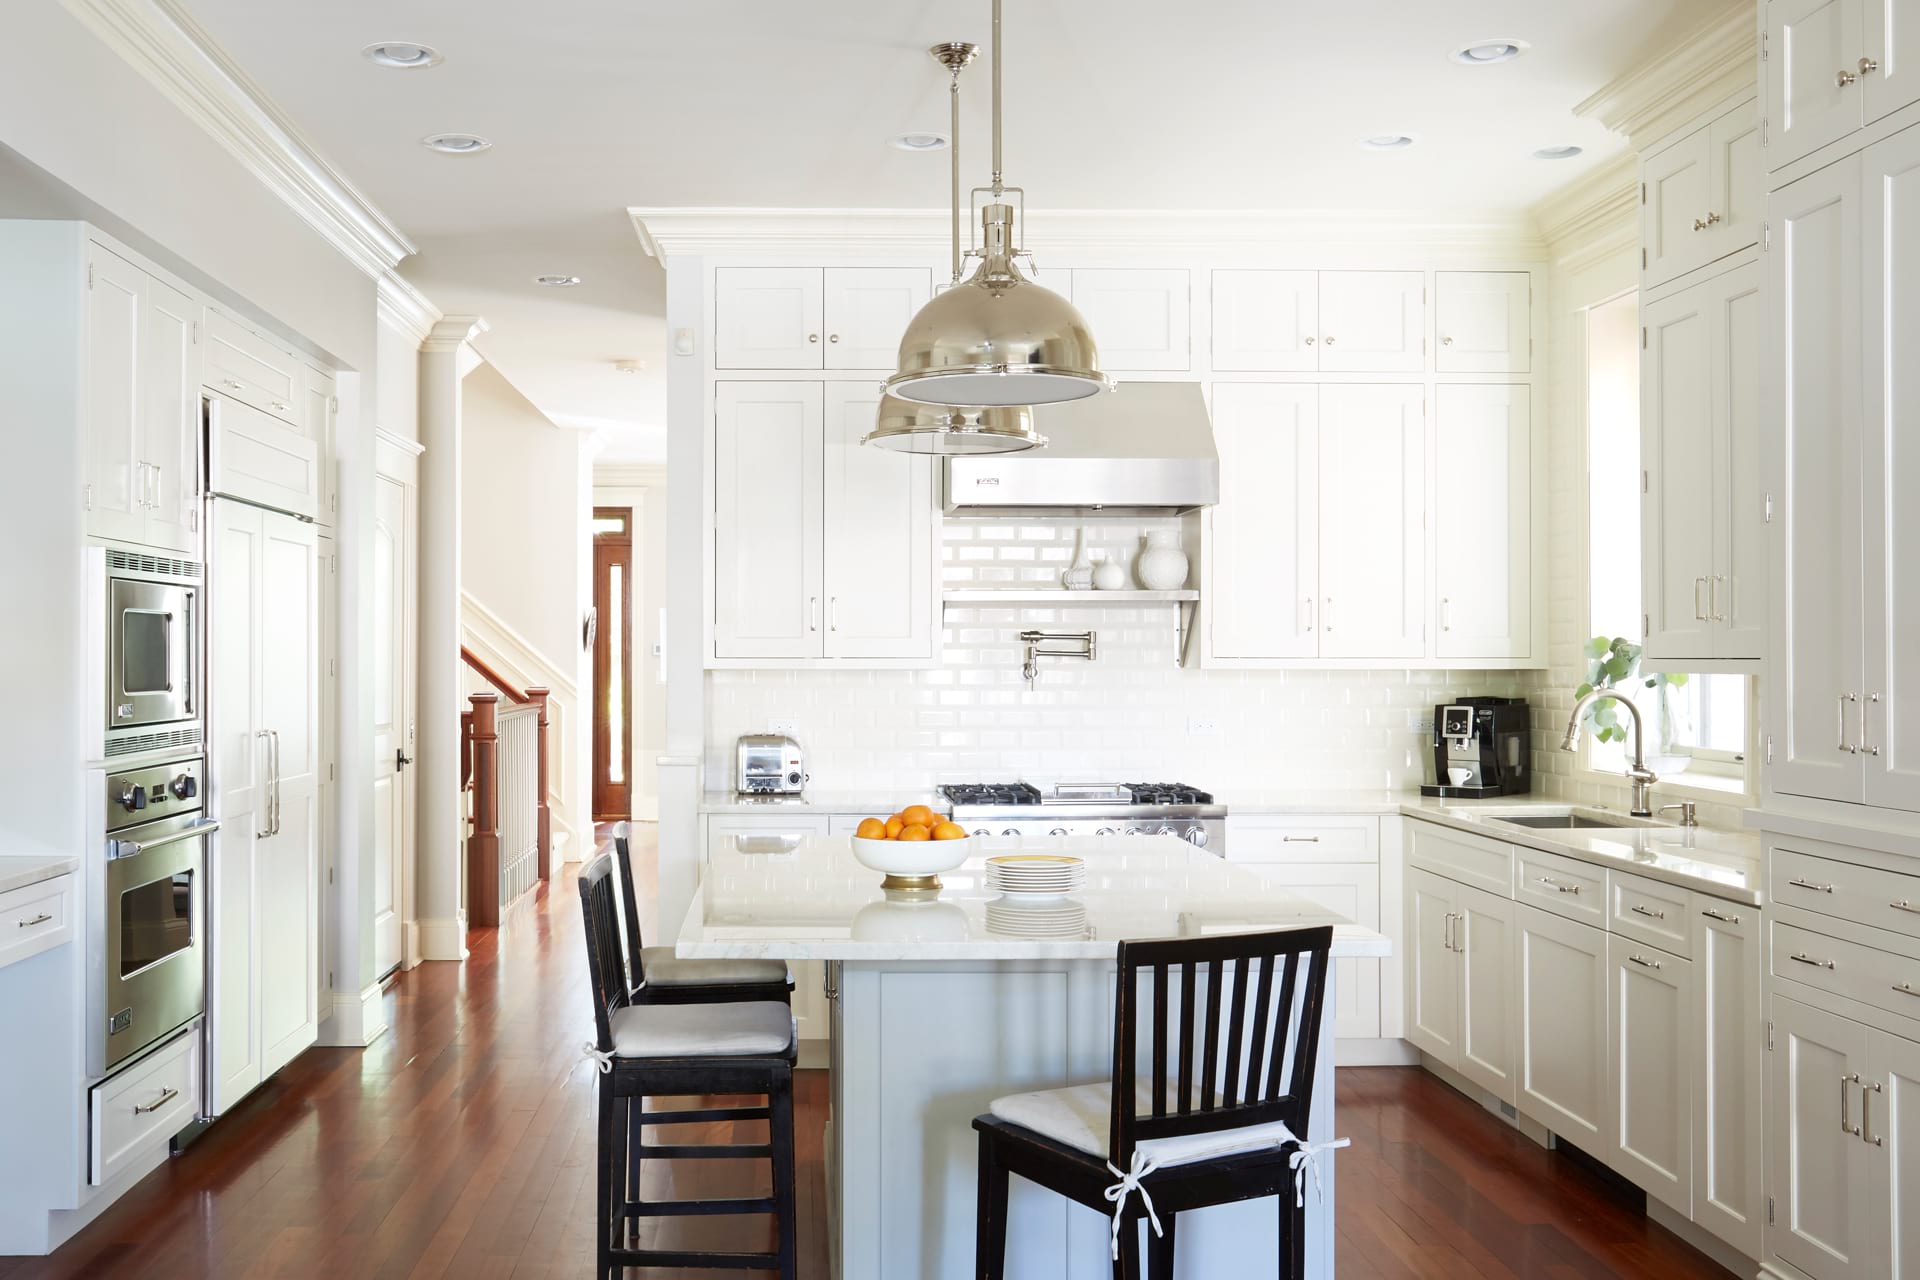 Classic touch to the kitchen where dominate white color and dark floor